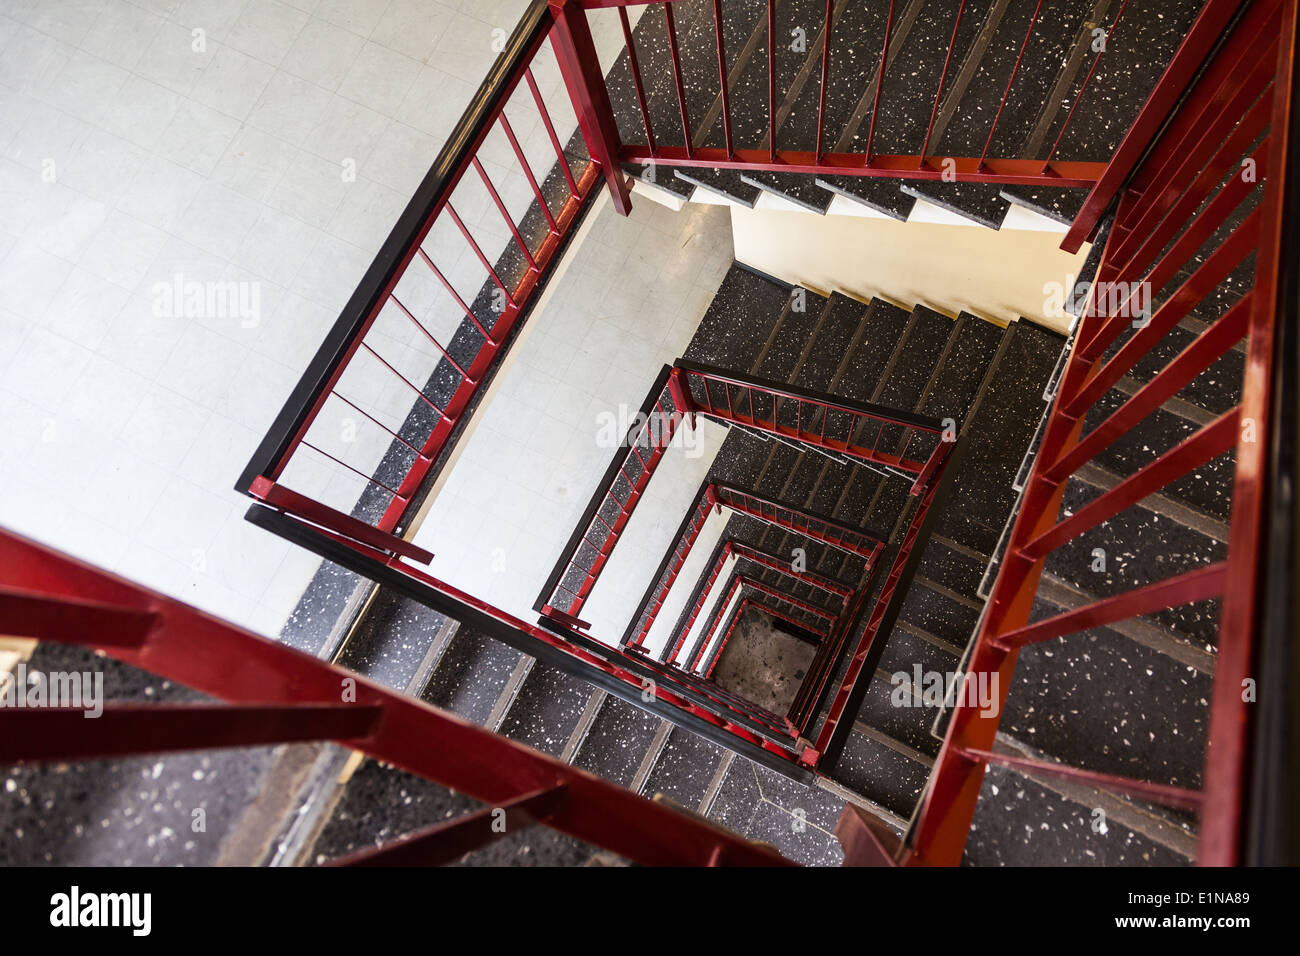 Abstract image of a stairwell in an office building at CERN, Geneva, Switzerland Stock Photo